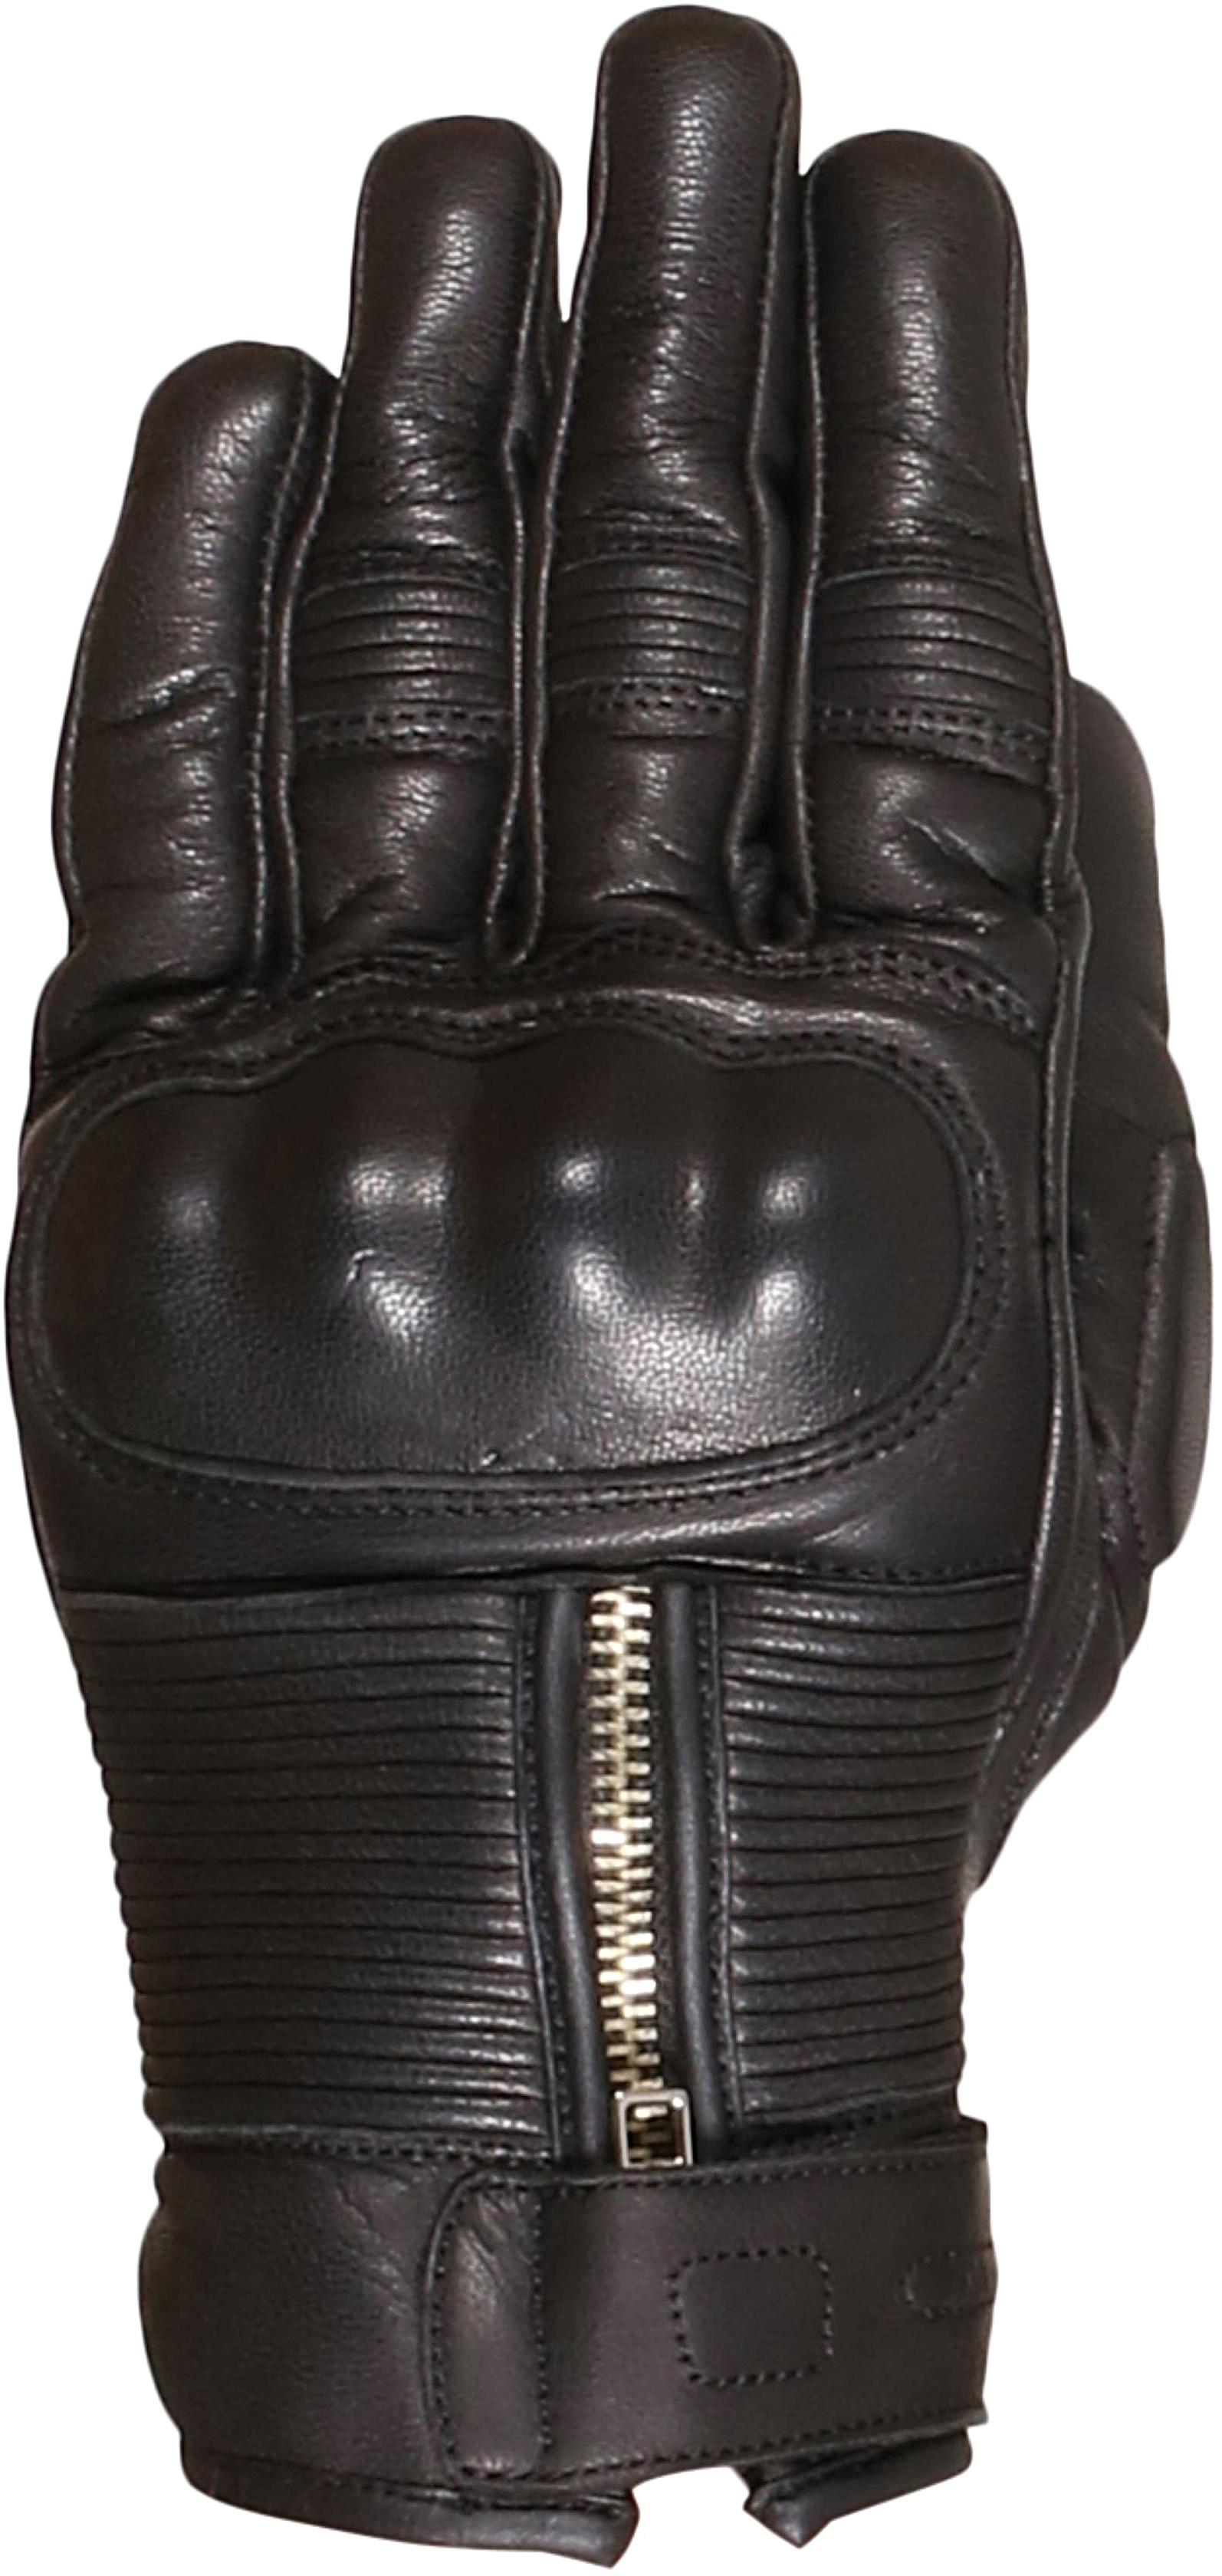 Weise Union Motorcycle Gloves - Black, Xl